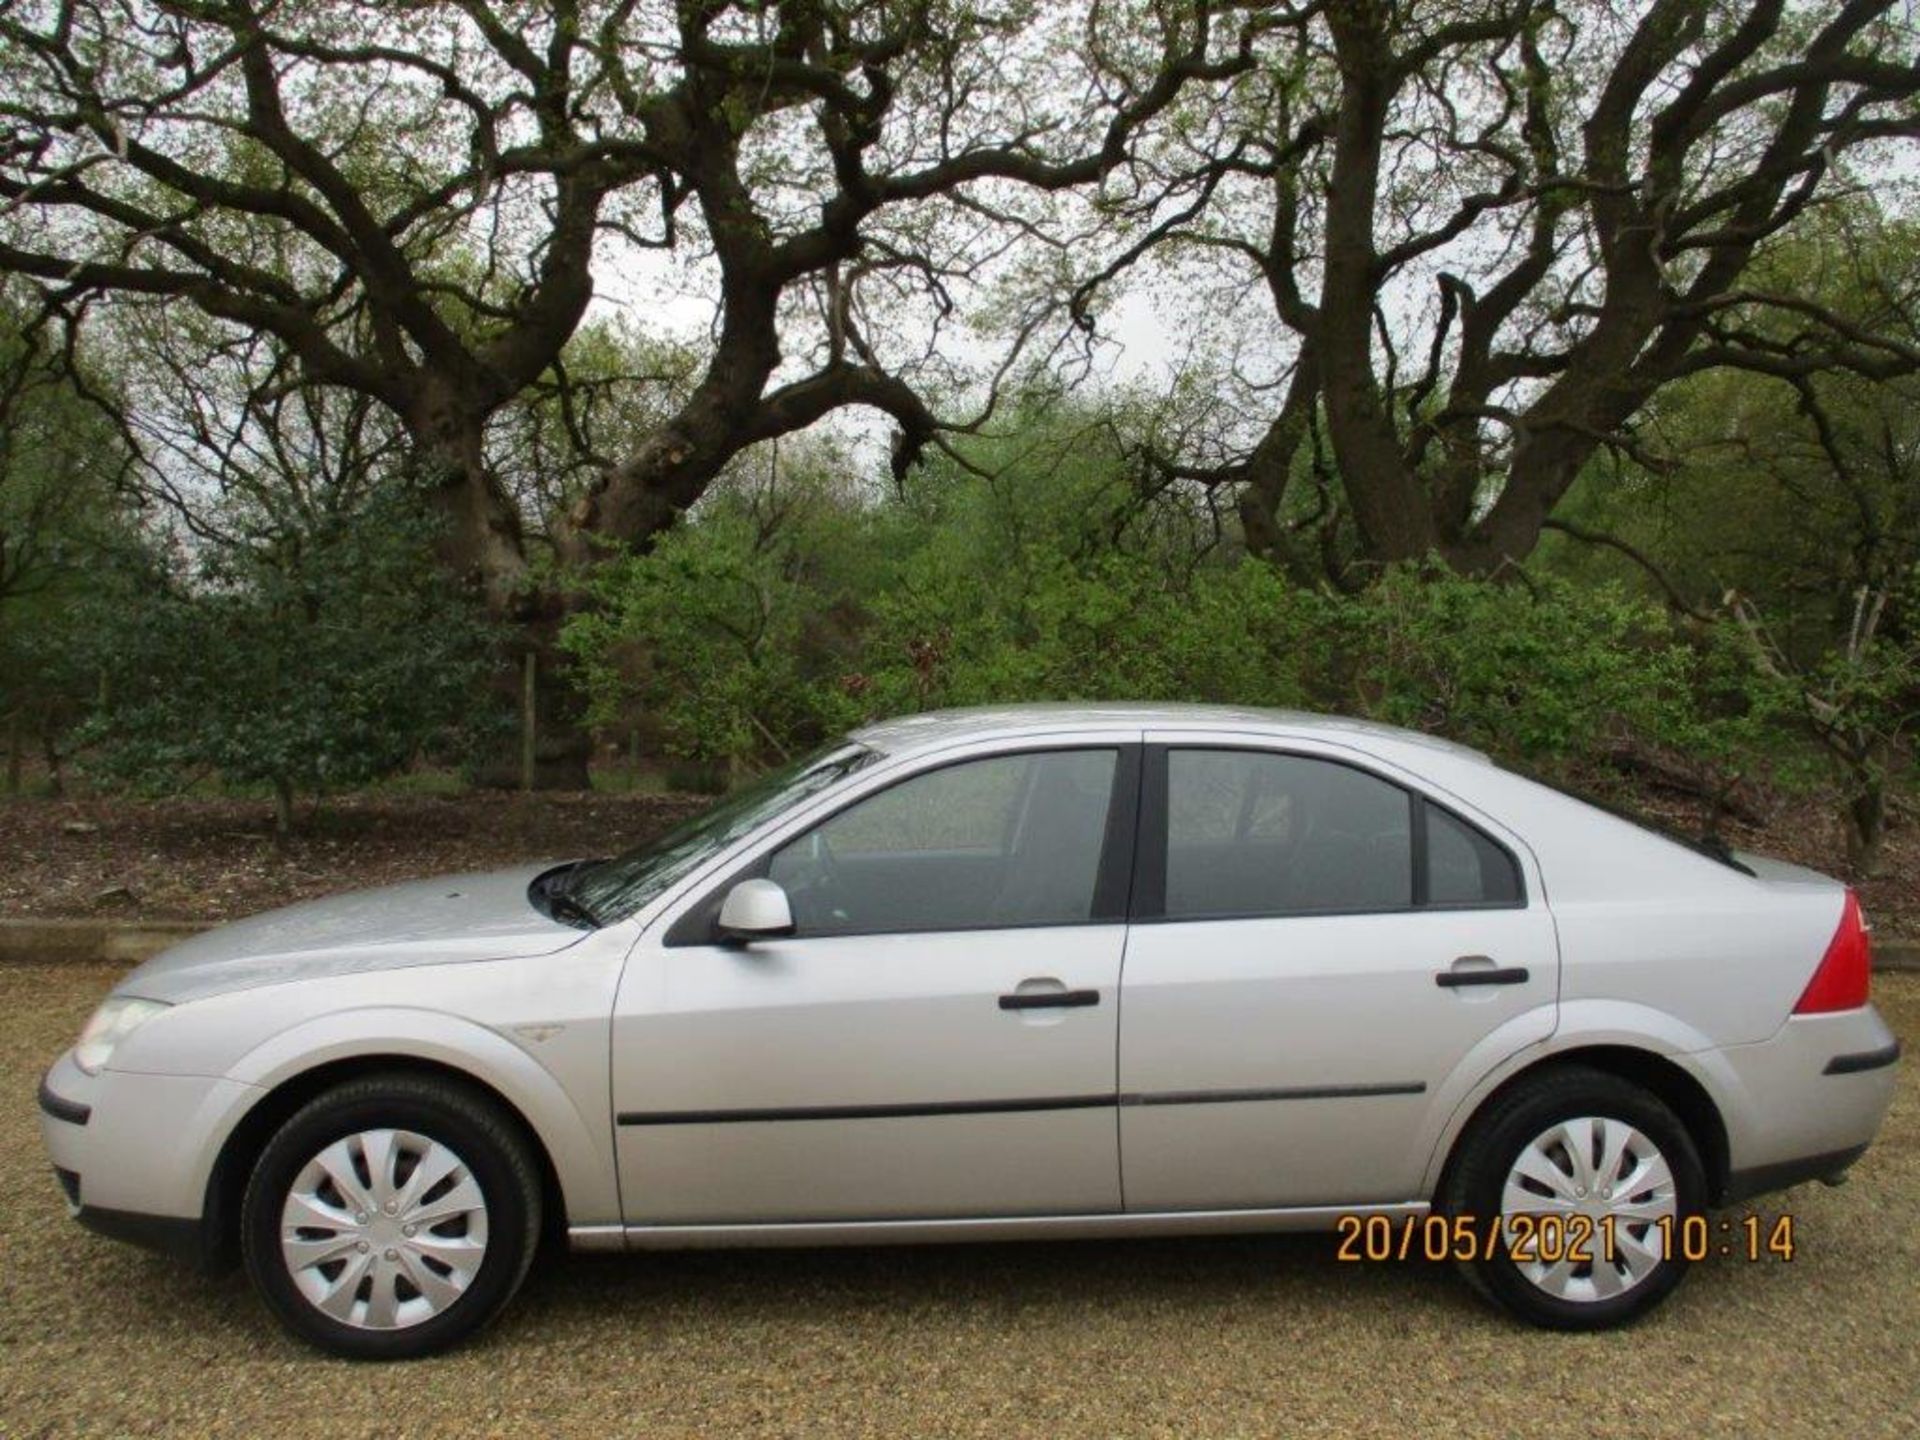 05 05 Ford Mondeo LX - Image 4 of 19